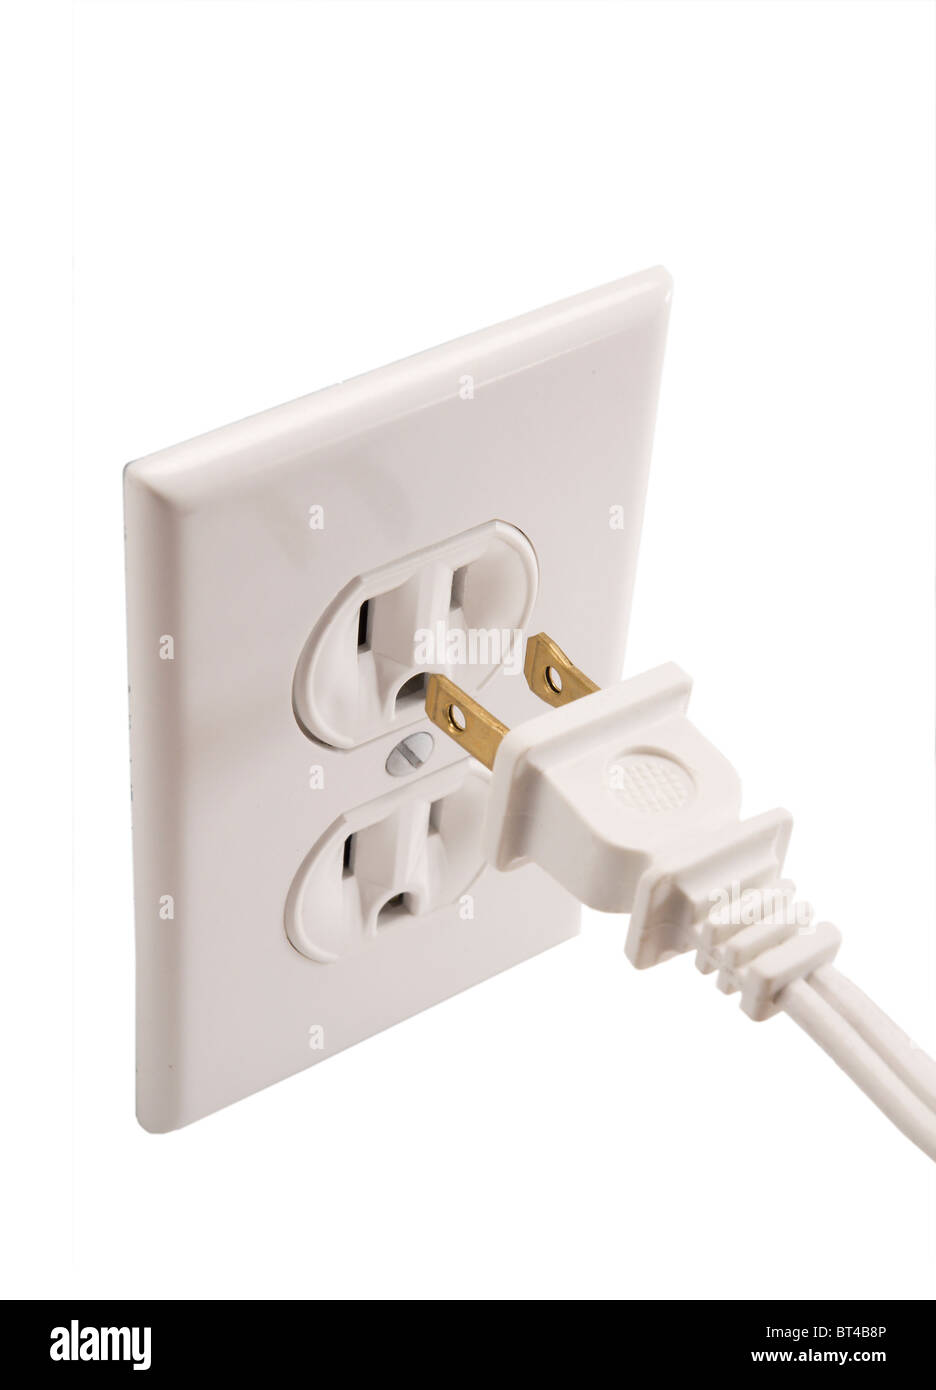 White electric plugs and outlet Stock Photo